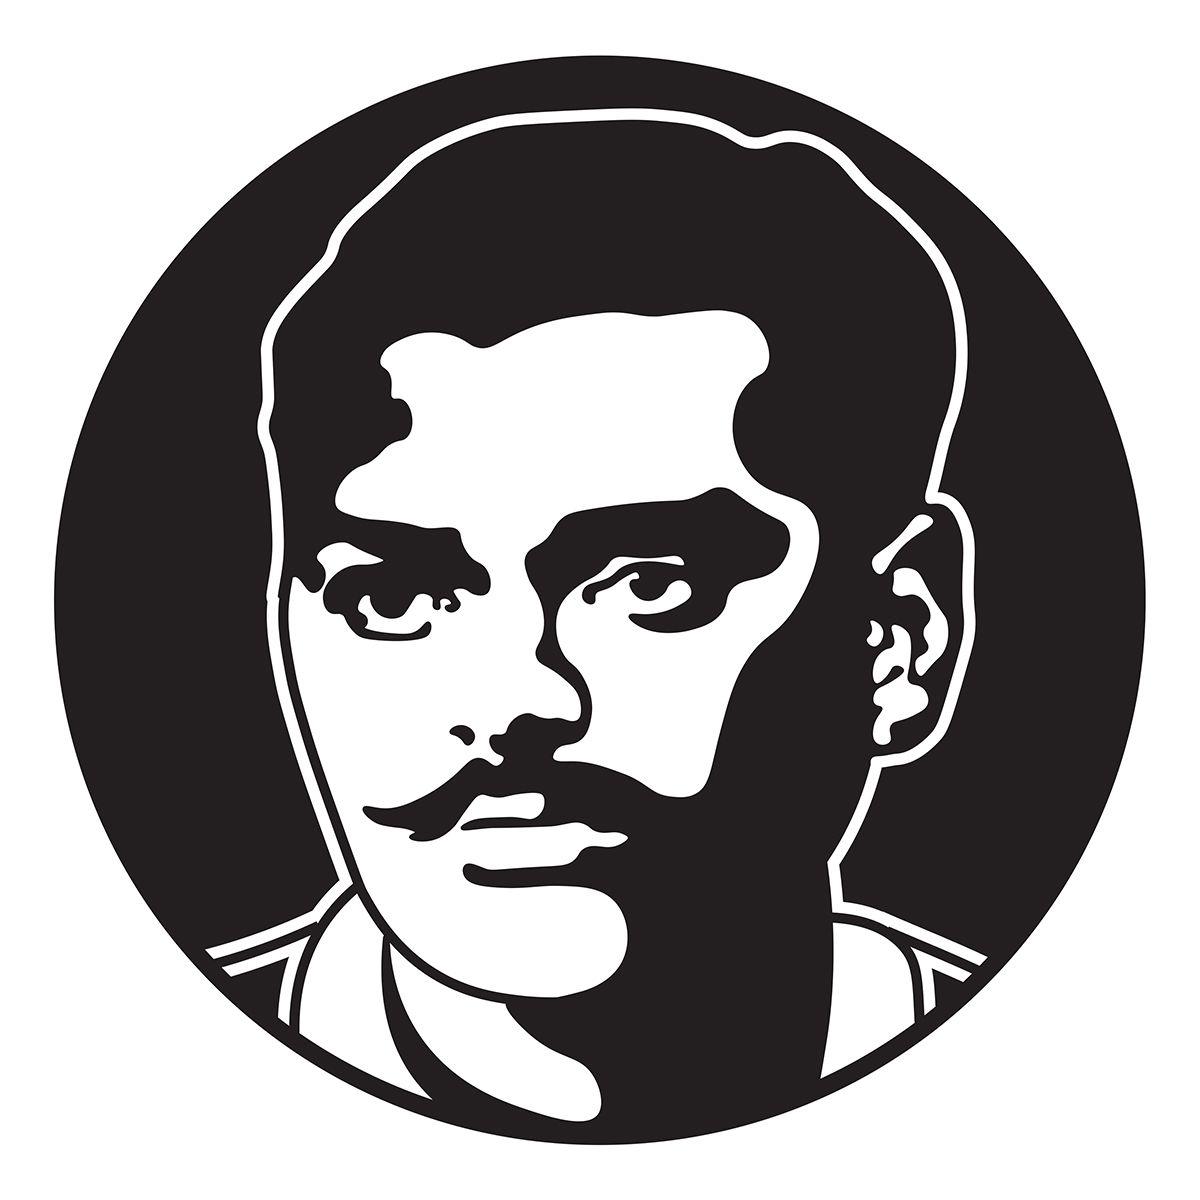 Chandra Shekhar Azad, One of the greatest freedom fighters